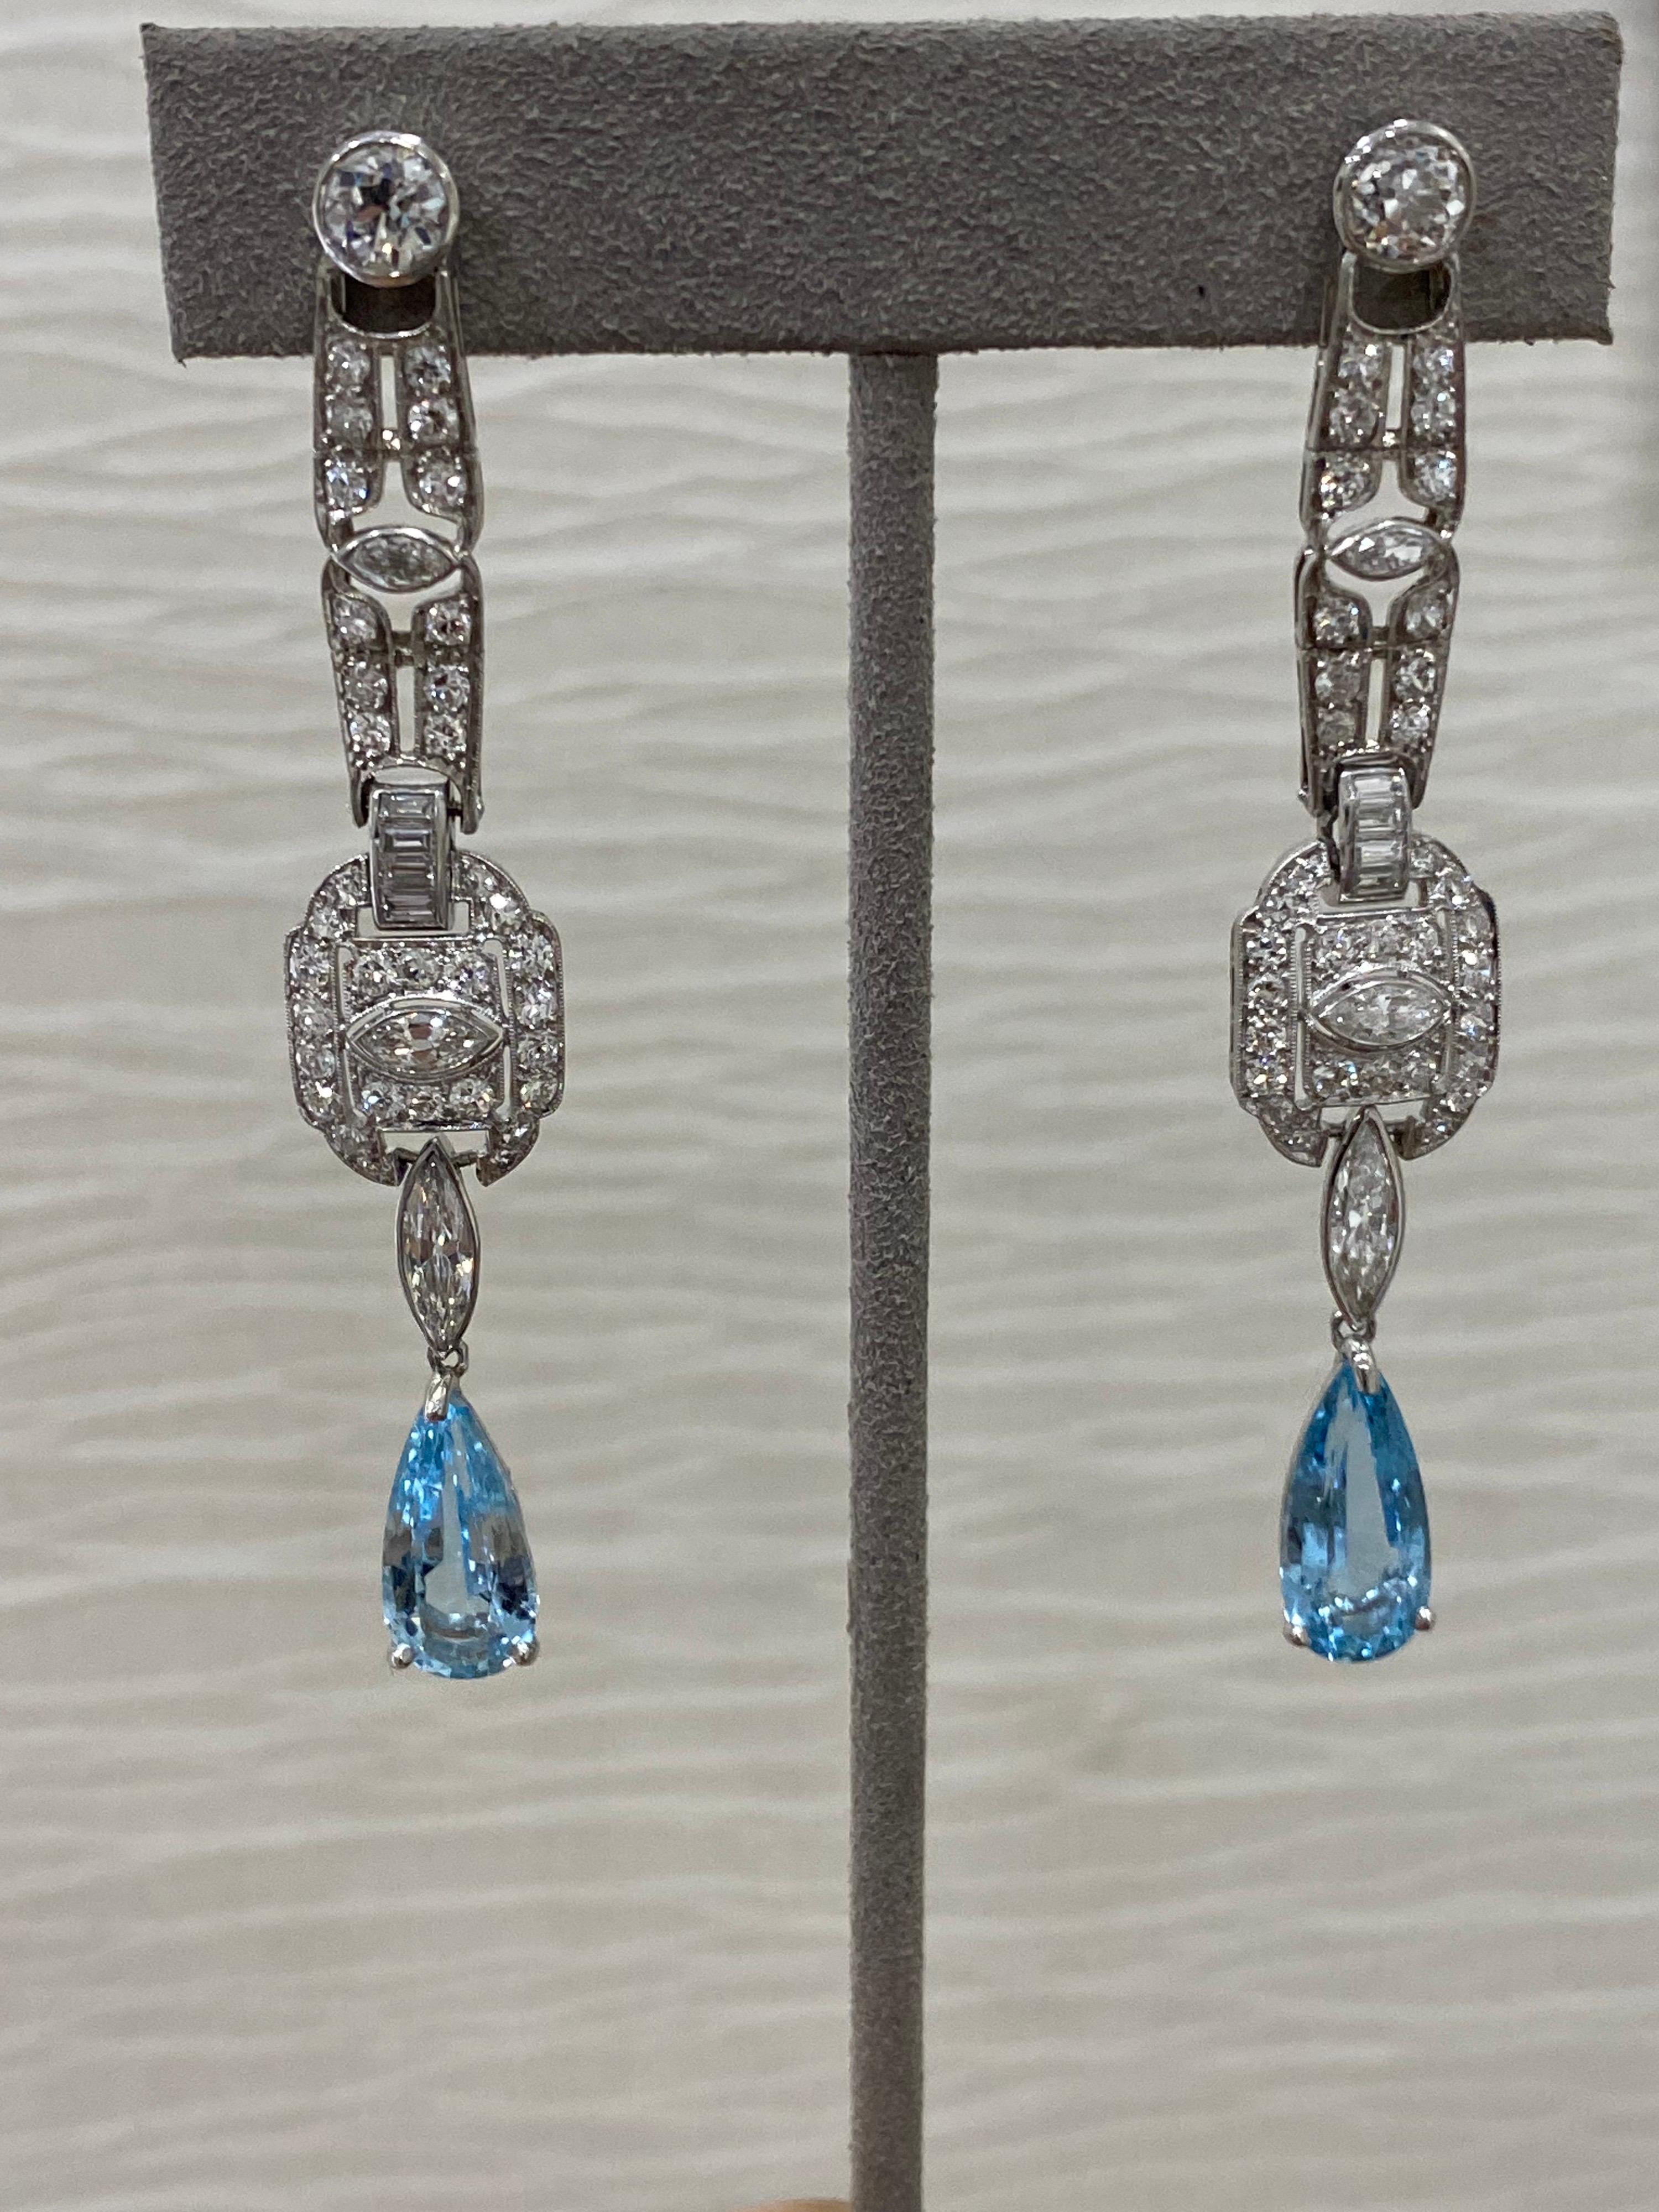 One- of-a- kind! These showstopper earrings were derived from original Circa 1920’s Art Deco pieces. They have been updated for modern wear. 
The aqua marines dangling on bottom are new and add the perfect amount of modern glamour. 
The Mindi Mond